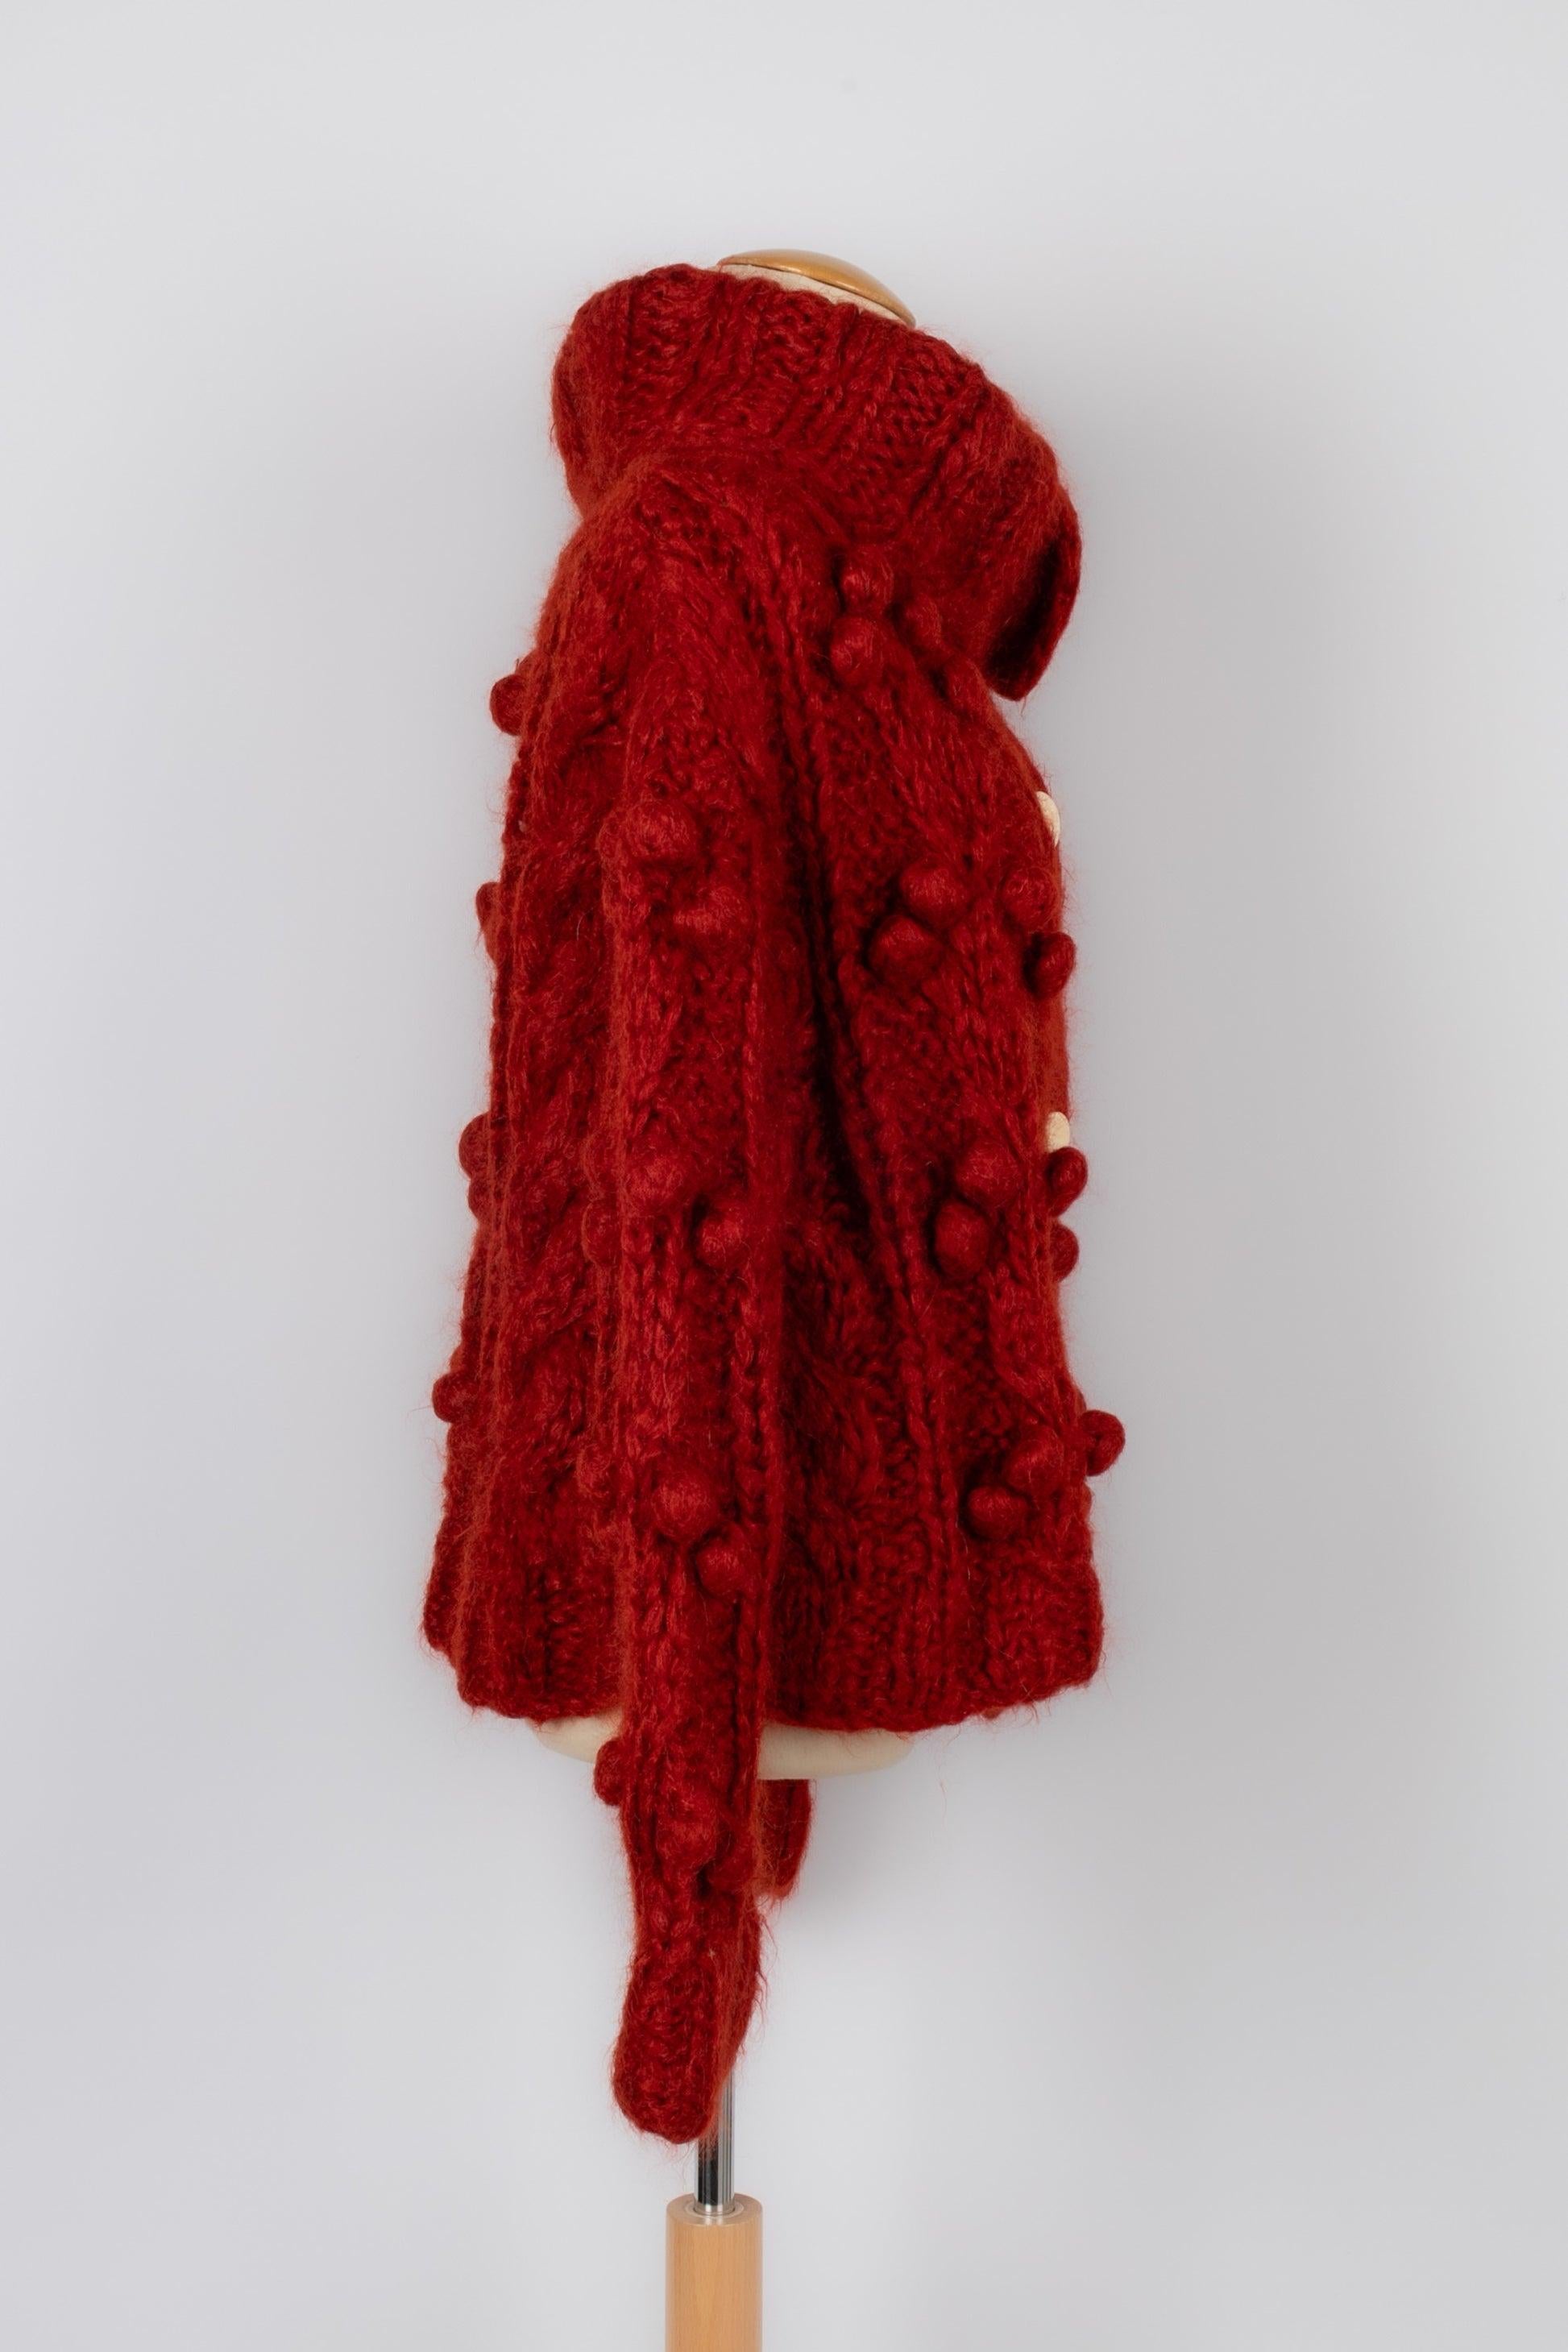 Dior - (Made in France) Red mohair cardigan. S size indicated. 1999 Fall-Winter Ready-to-Wear Collection under the artistic direction of John Galliano.

Additional information:
Condition: Very good condition
Dimensions: Shoulder width: 40 cm -